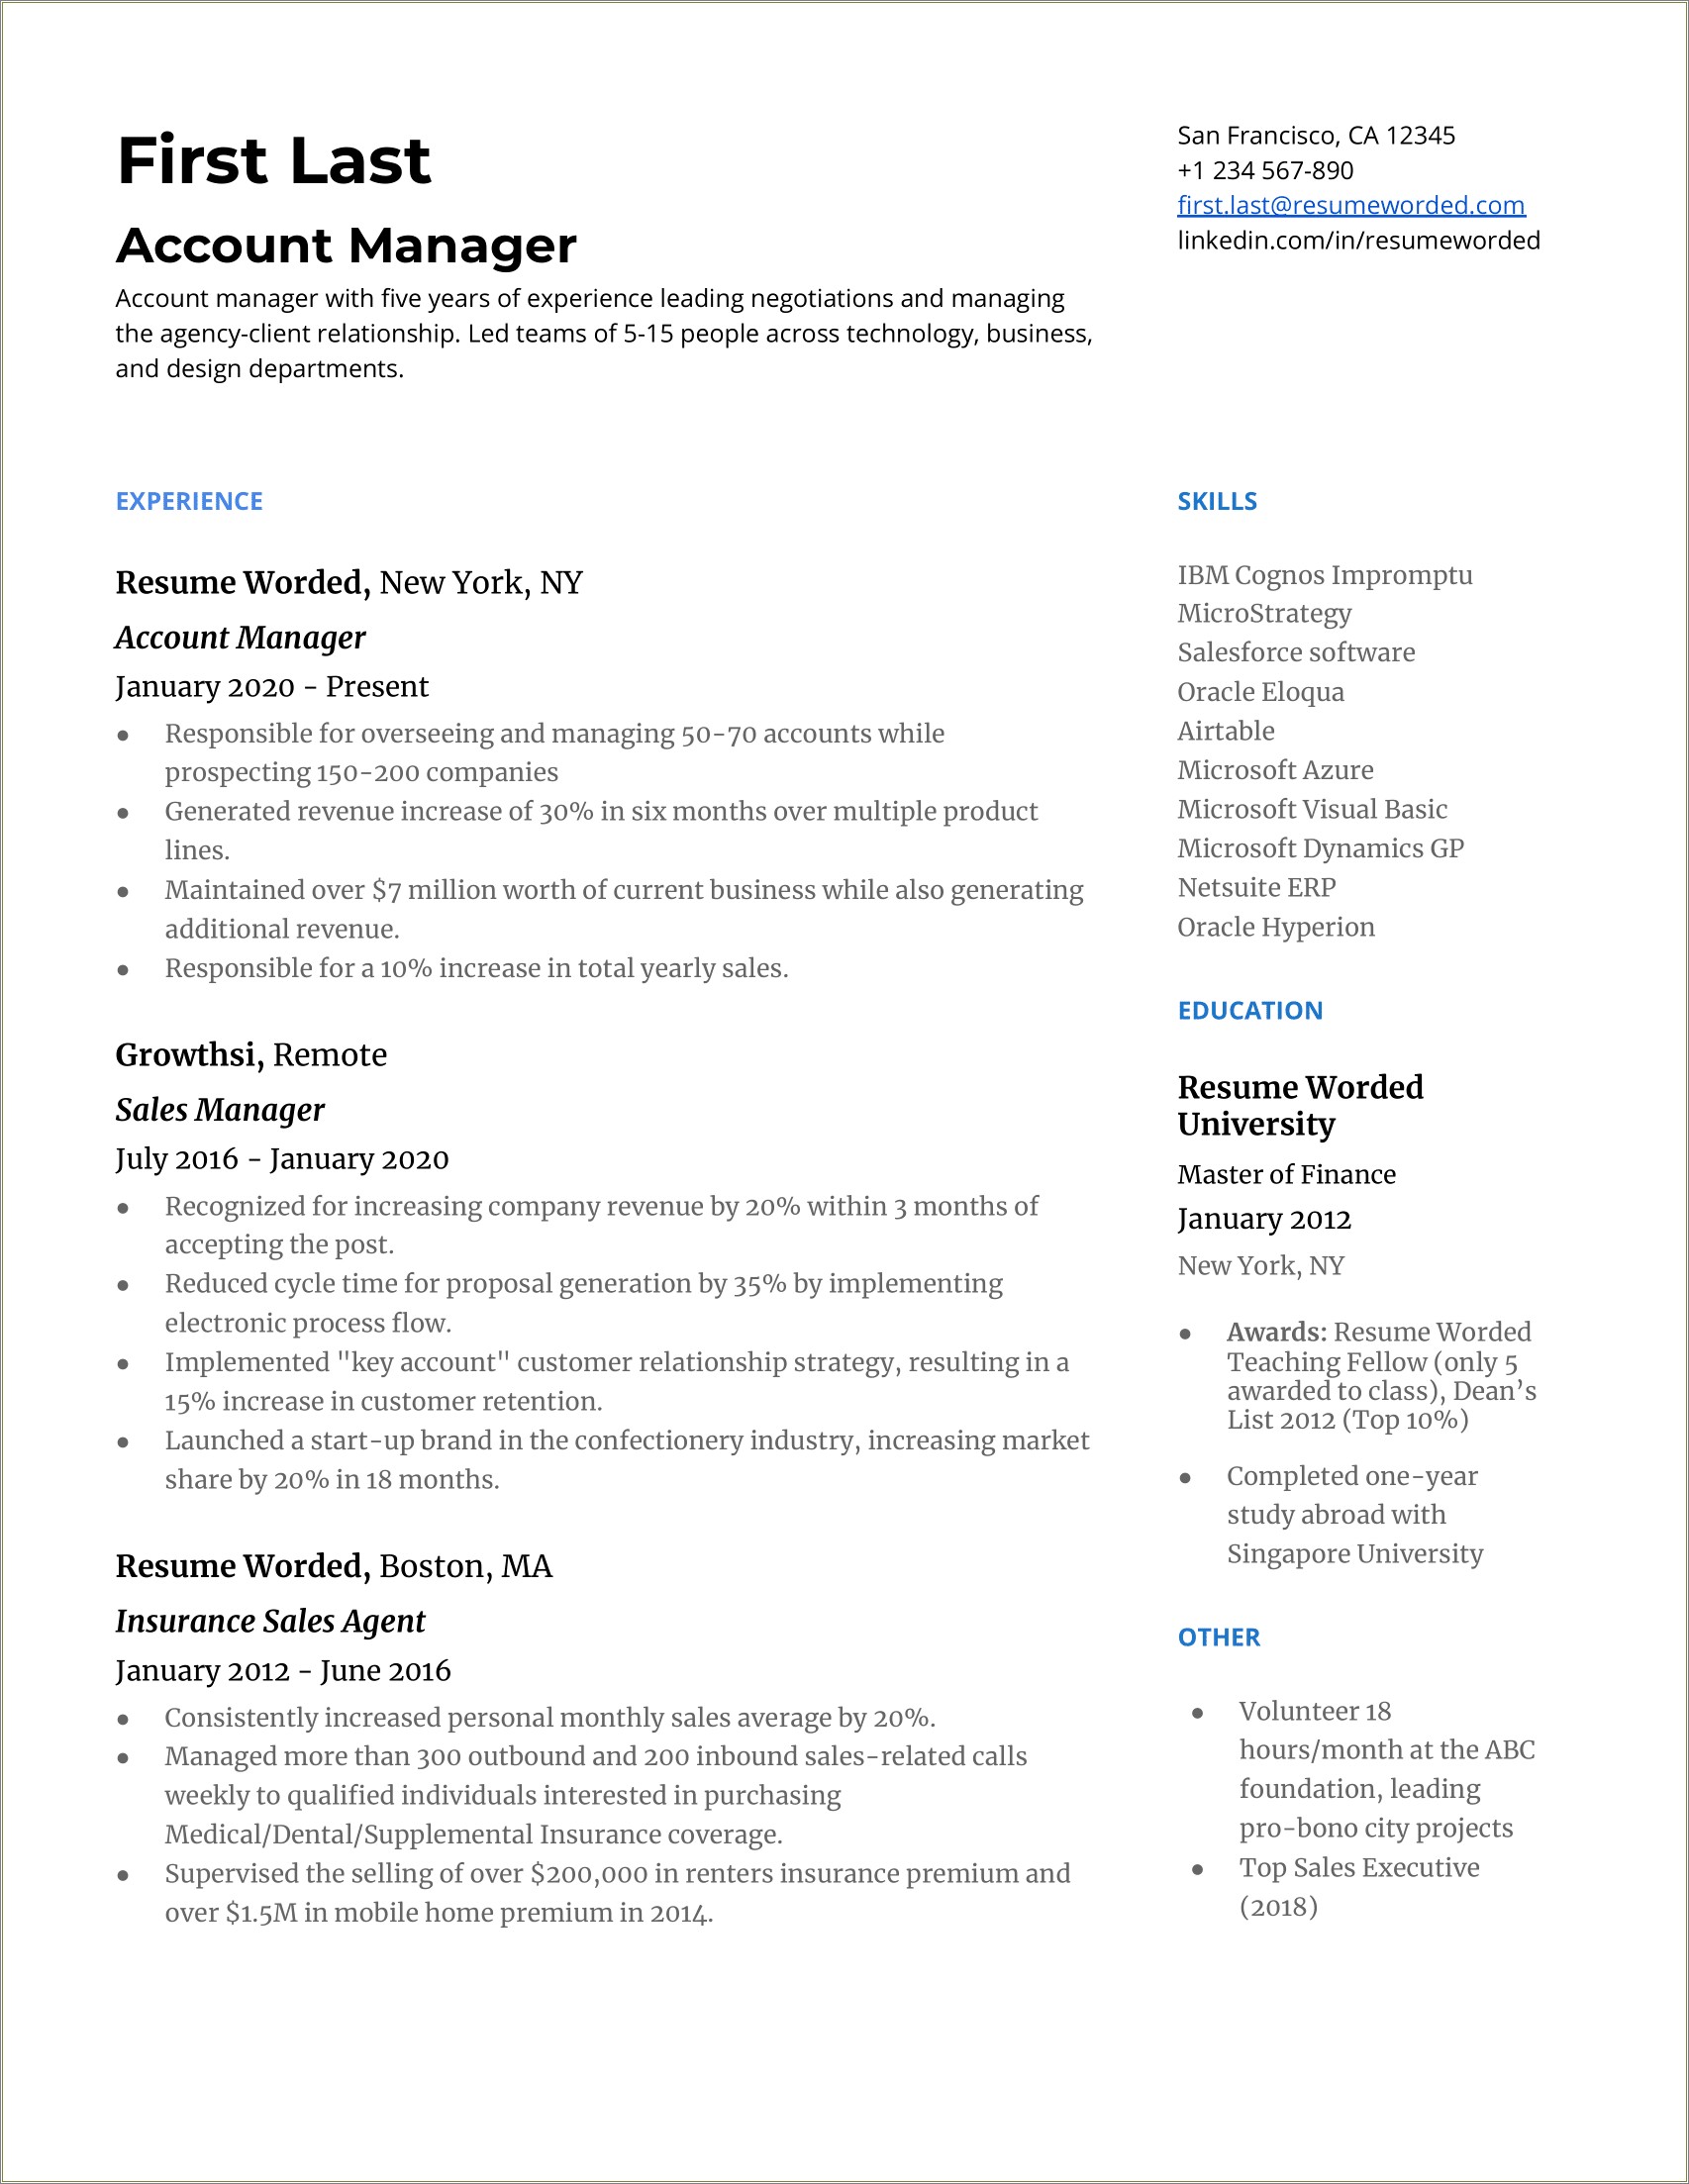 Linkedin Resume Examples Experienced Sales Account Manager